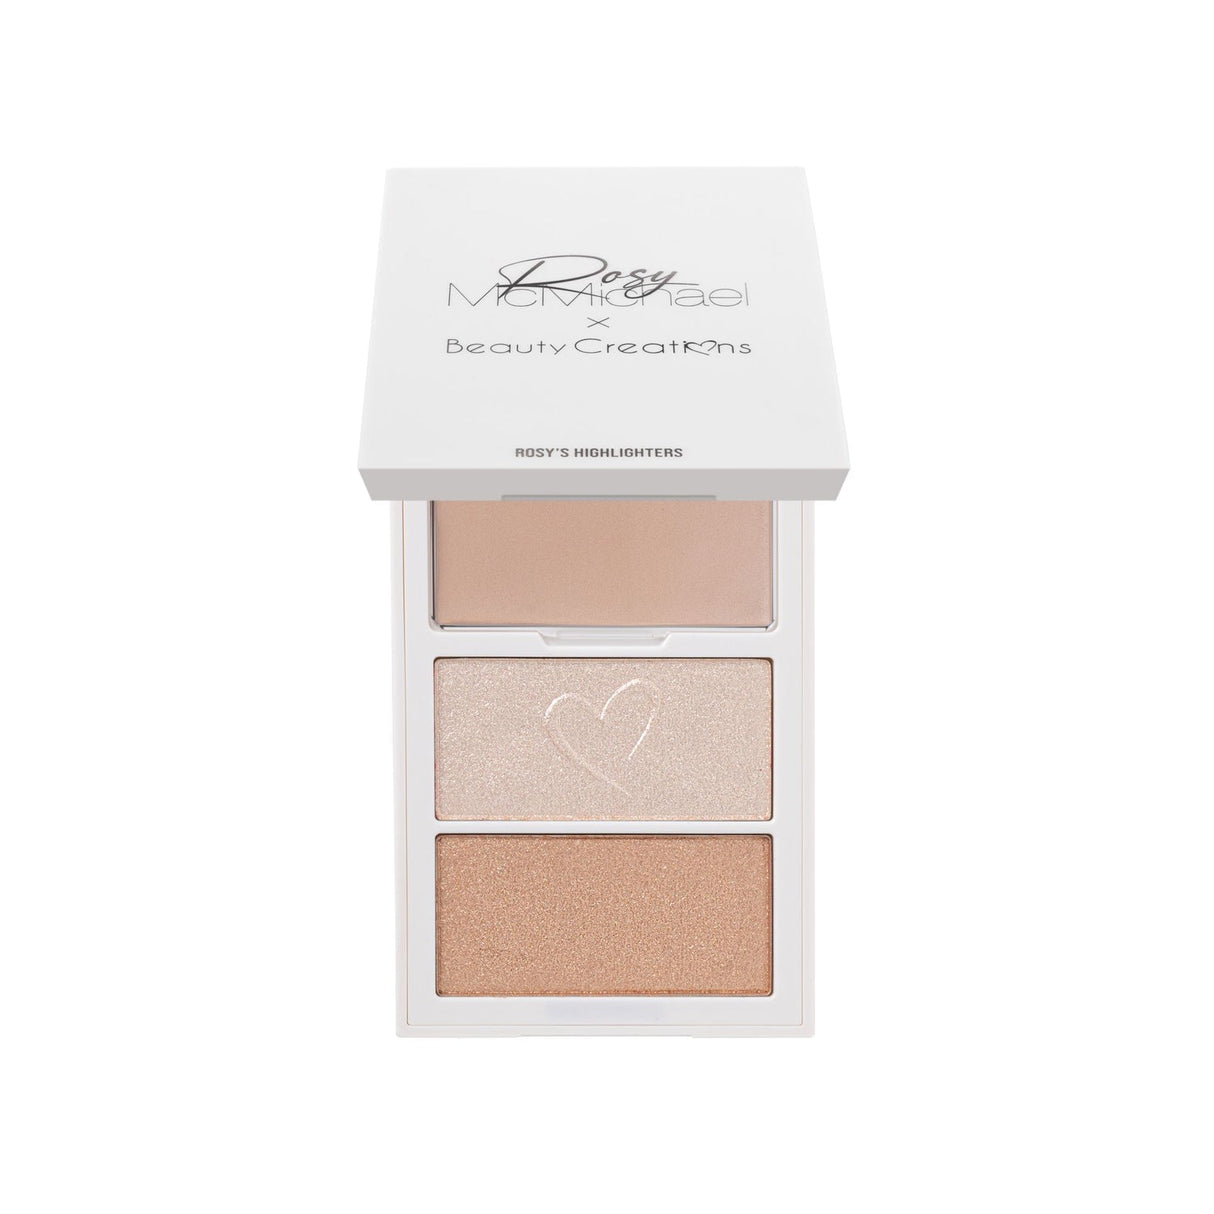 BEAUTY CREATIONS - ROSY MCMICHAEL VOL 2 - ROSY'S HIGHLIGHTERS -1PC